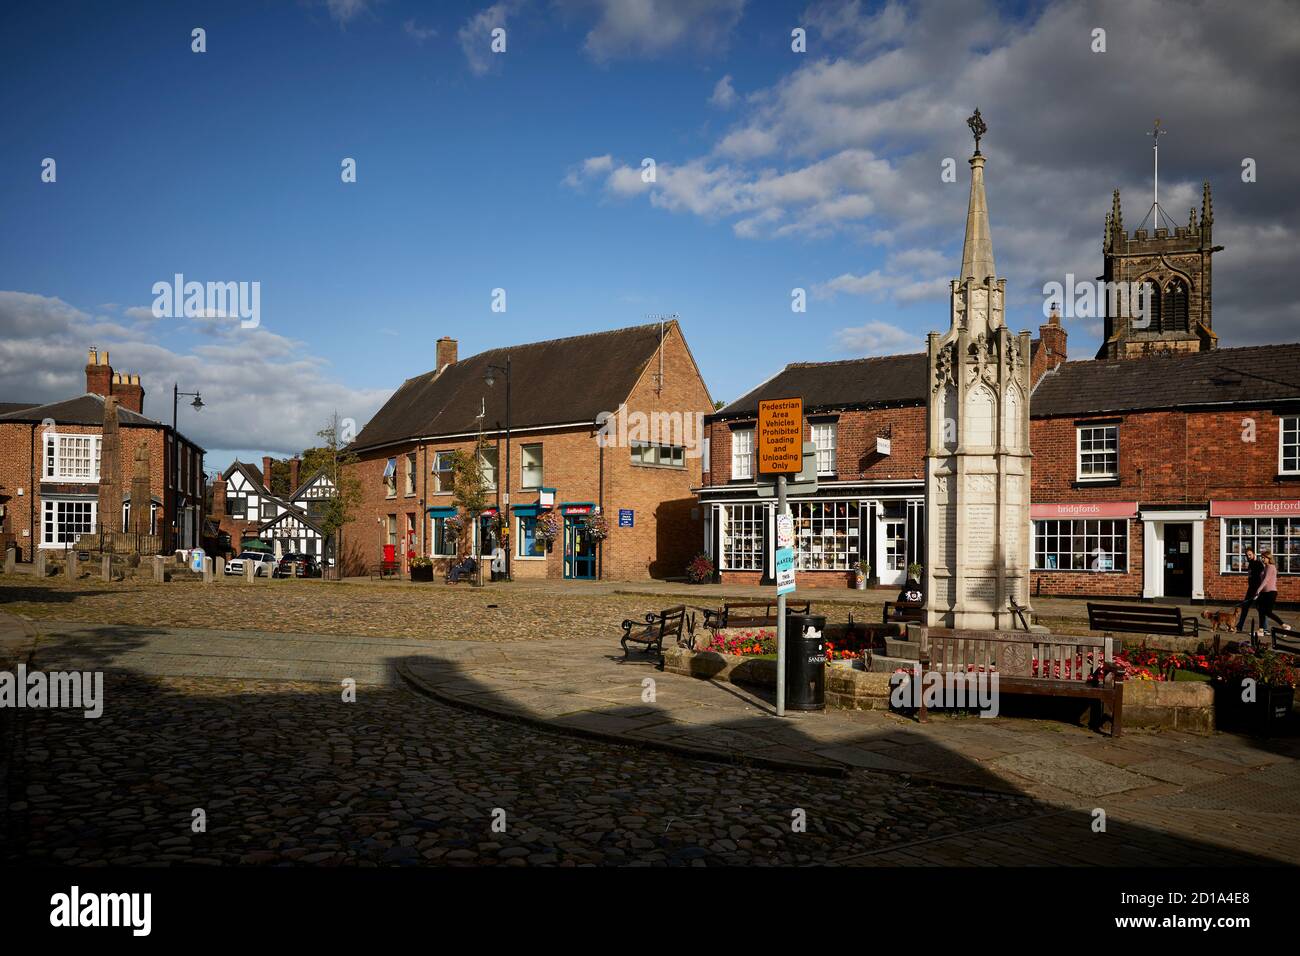 Sandbach market town Cheshire, England, The Cobbles Market Square  with the Saxon Stones and the cenotaph Stock Photo